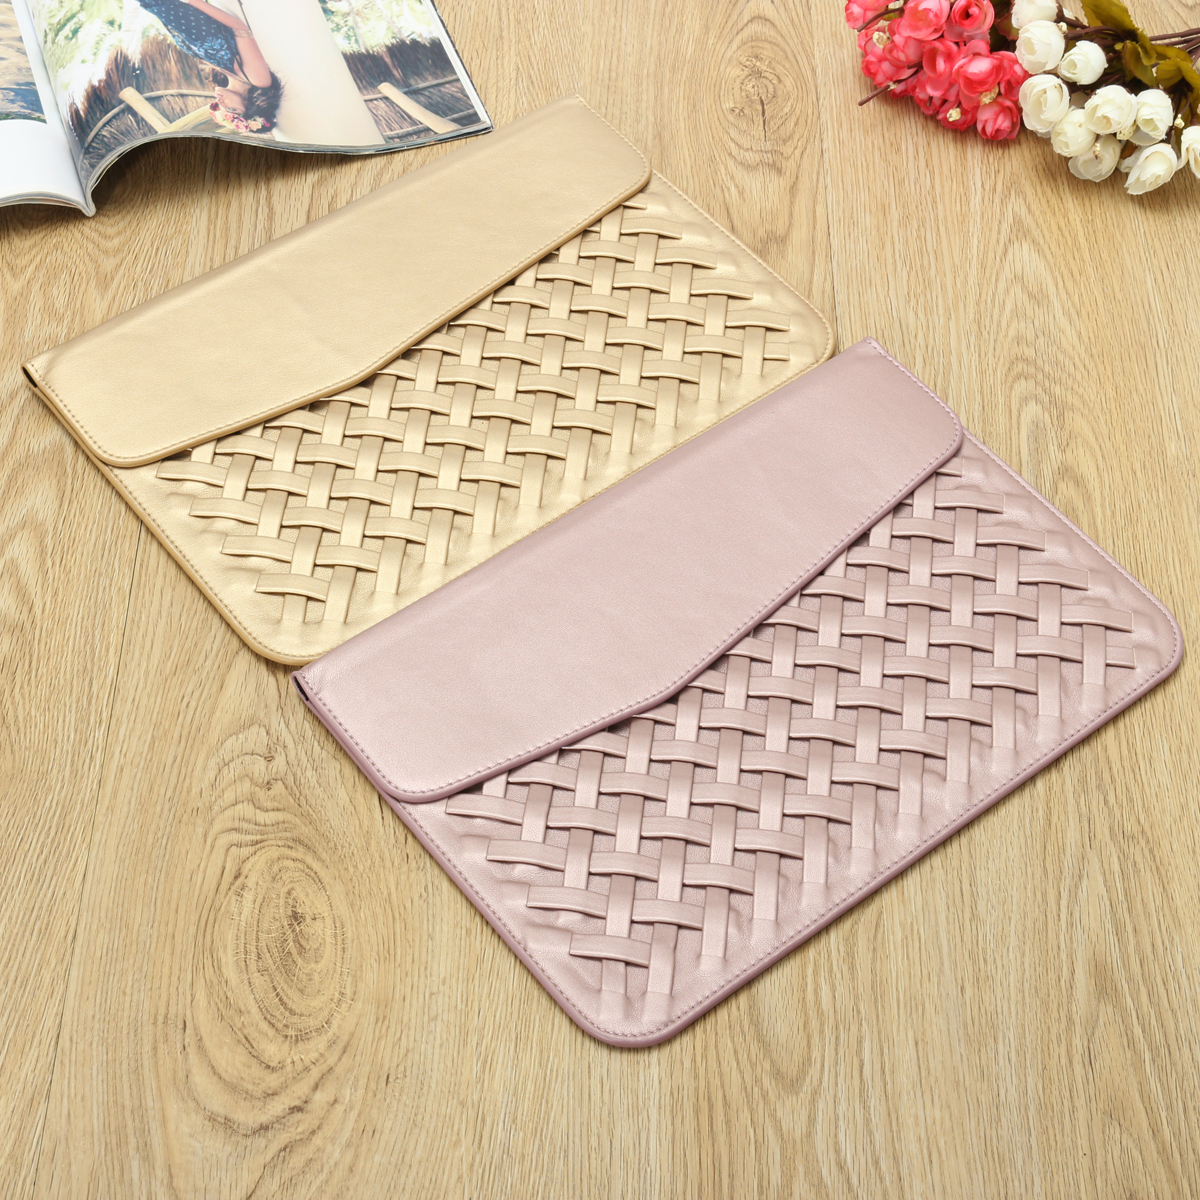 12-inch-Weaving-Laptop-Bag-PU-Leather-Case-Cover-Bag-for-Xiaomi-Makbook-Laptop-1101779